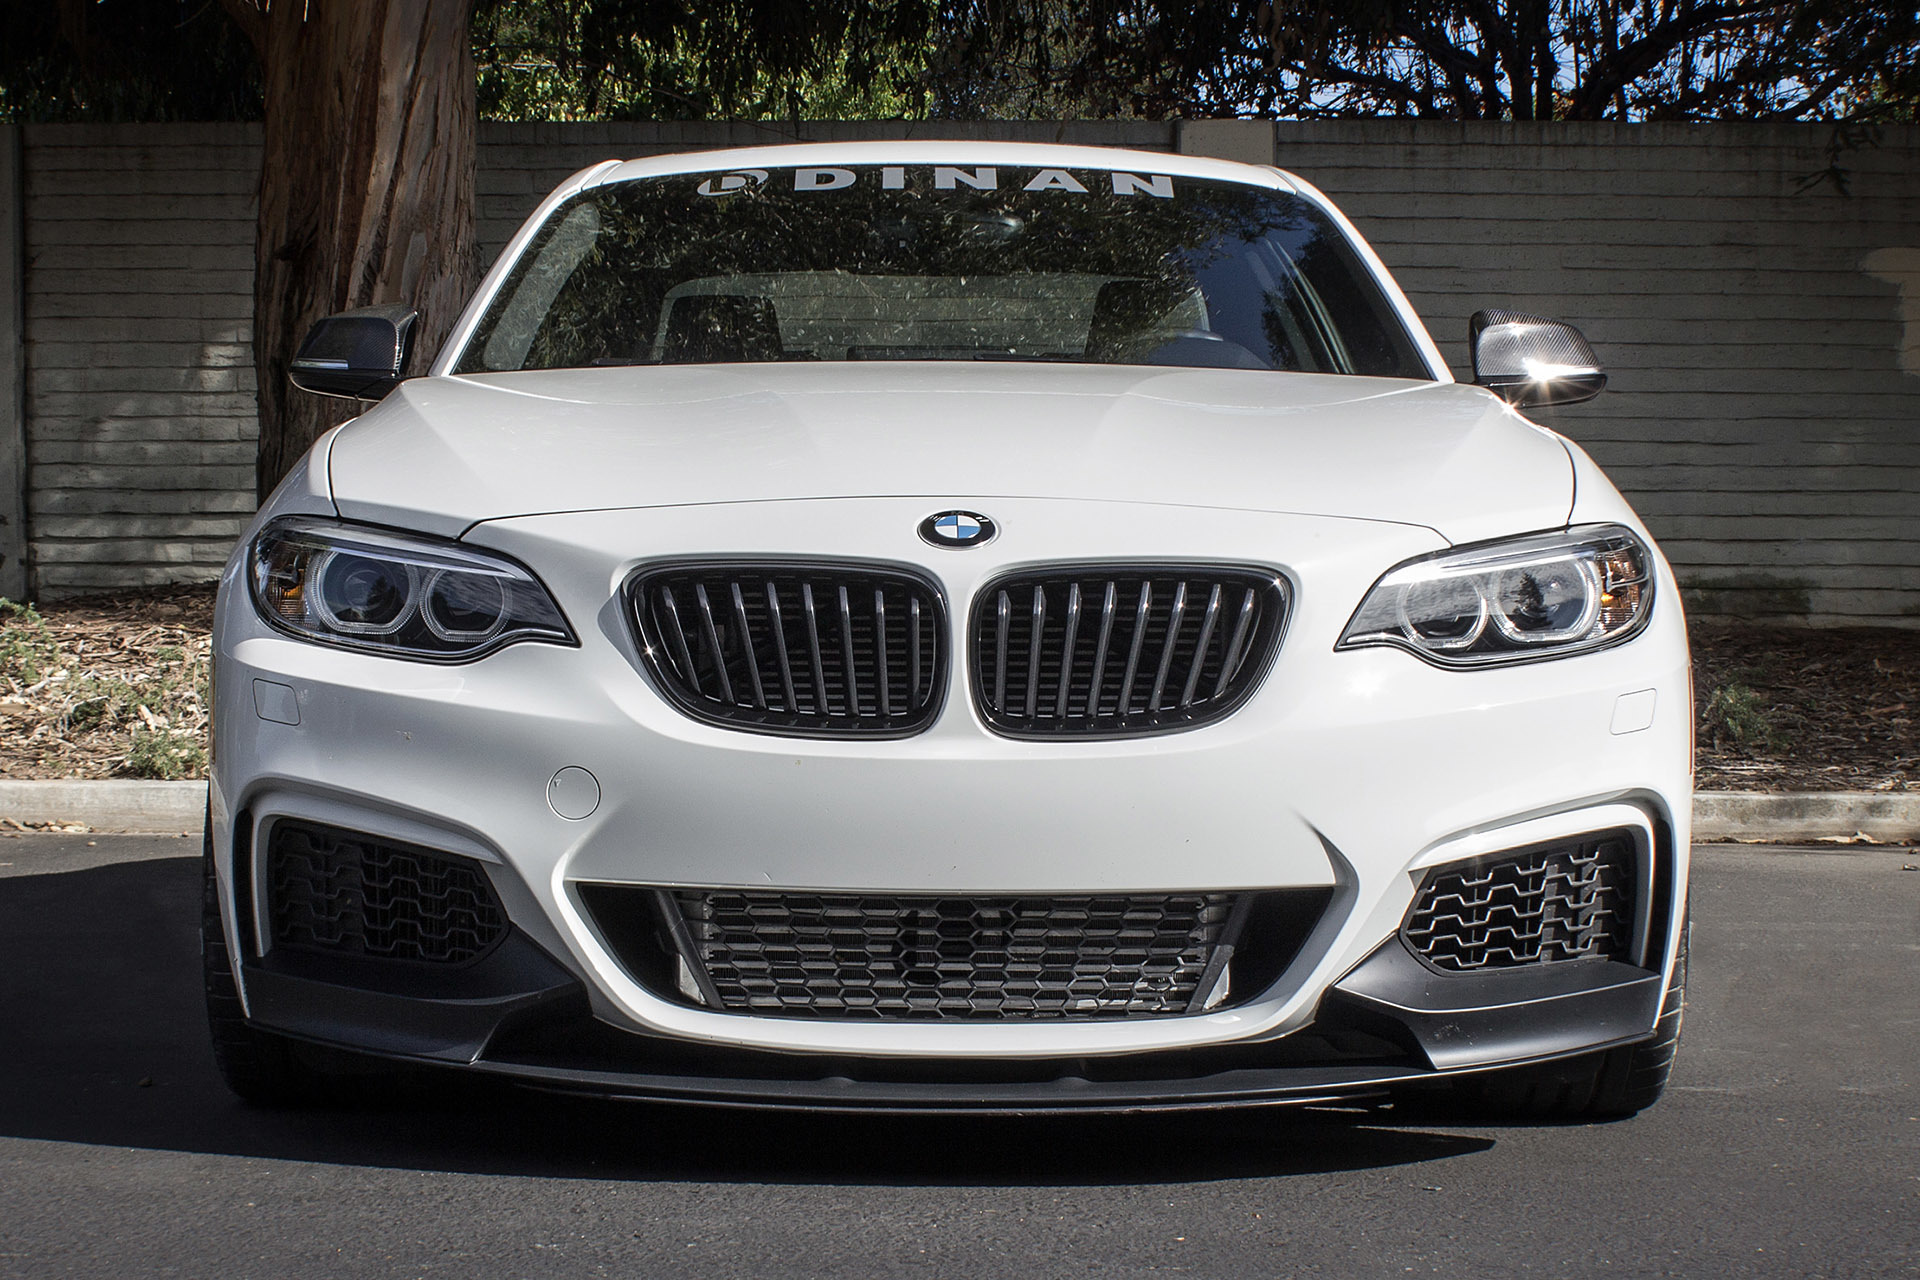 BMW M235i by Dinan Speeds Up in Video